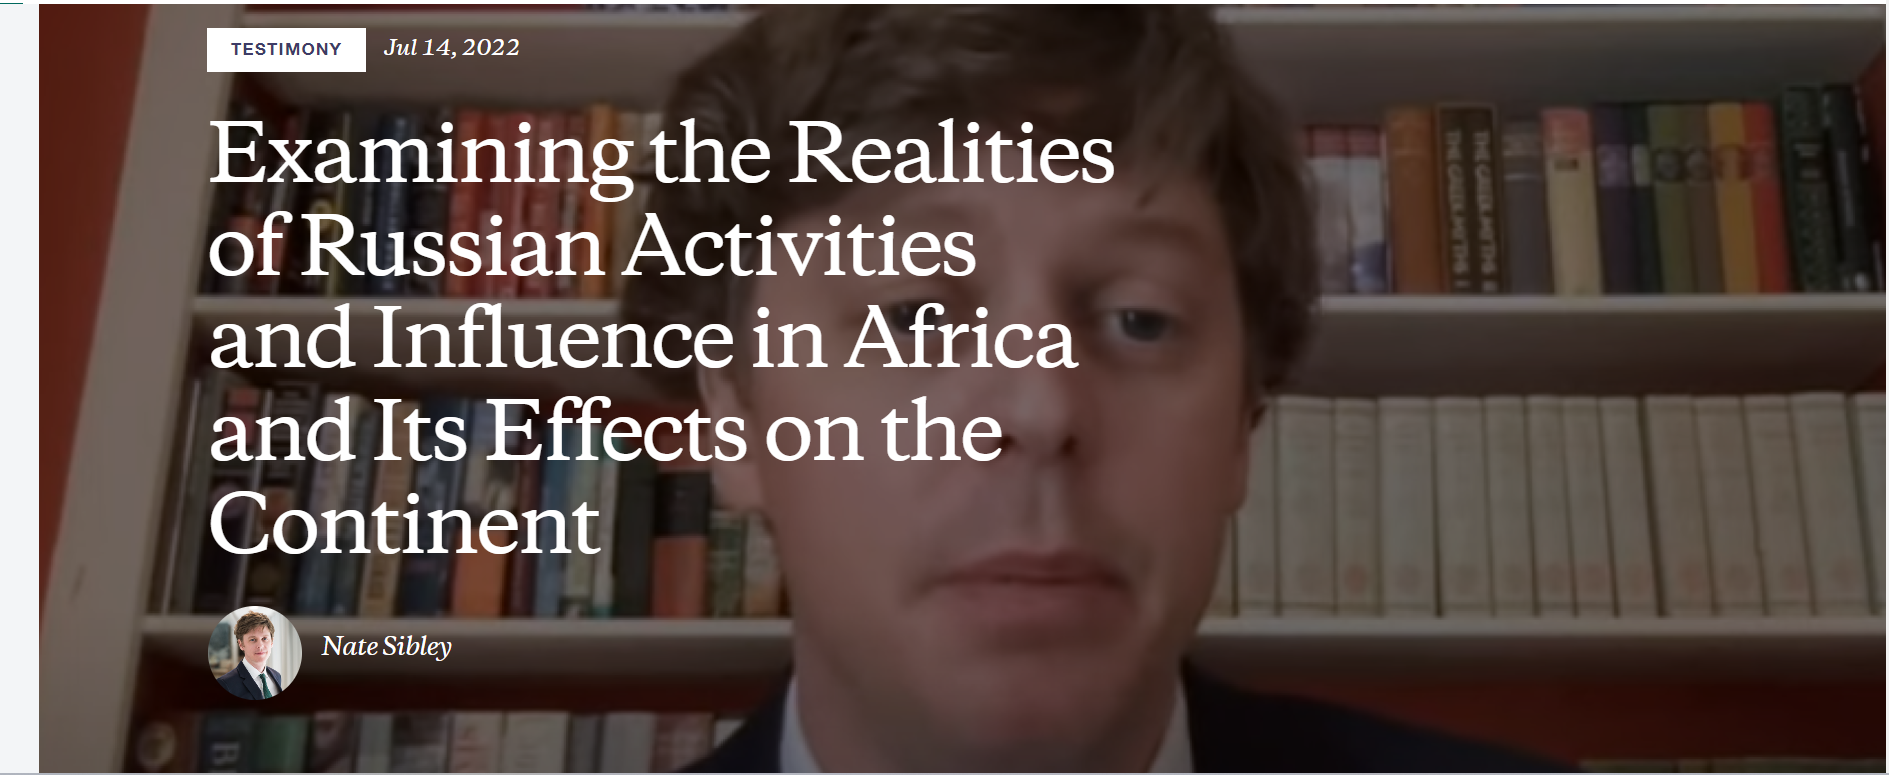 Thumbnail Examining the Realities of Russian Activities and Influence in Africa and Its Effects on the Continent